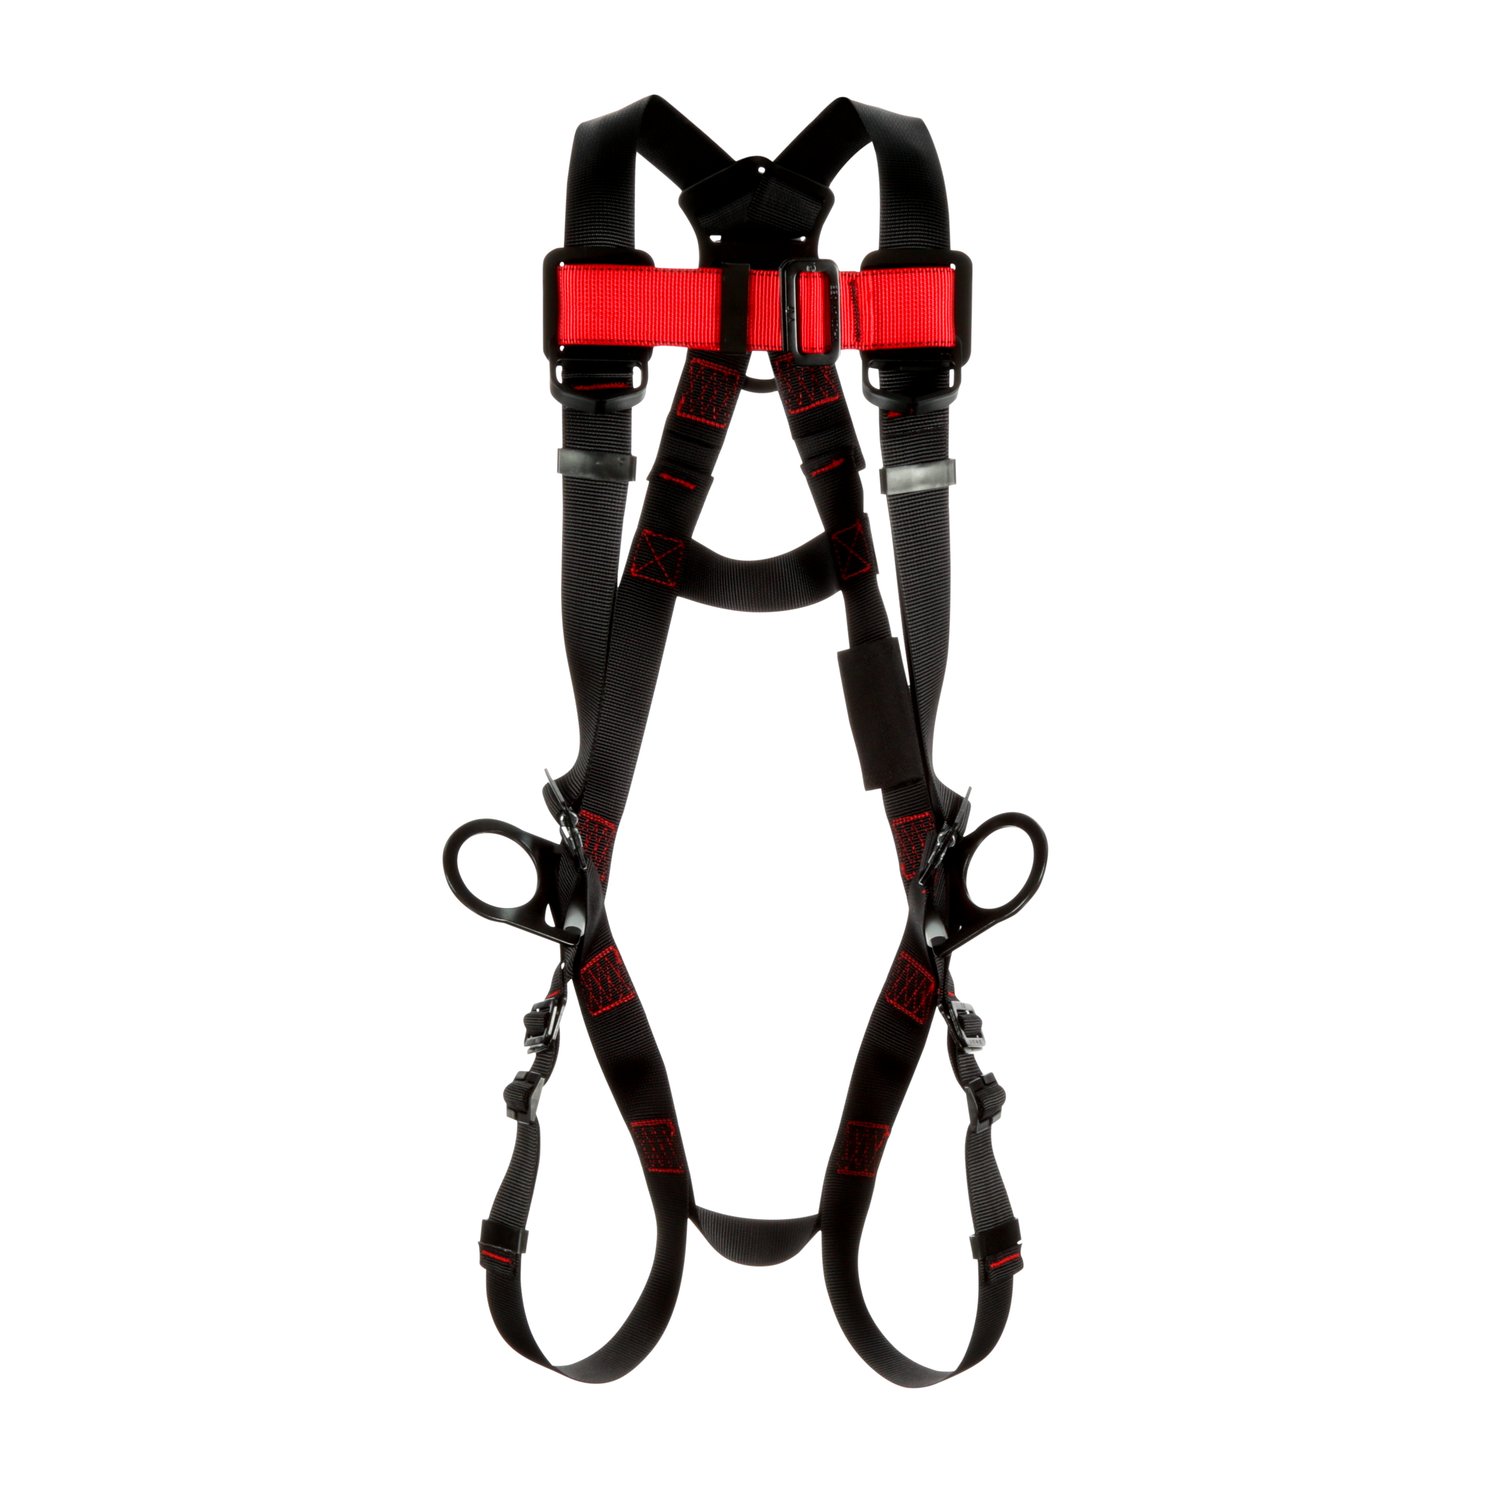 7100184576 - 3M Protecta P200 Vest Positioning Safety Harness 1161559, Small